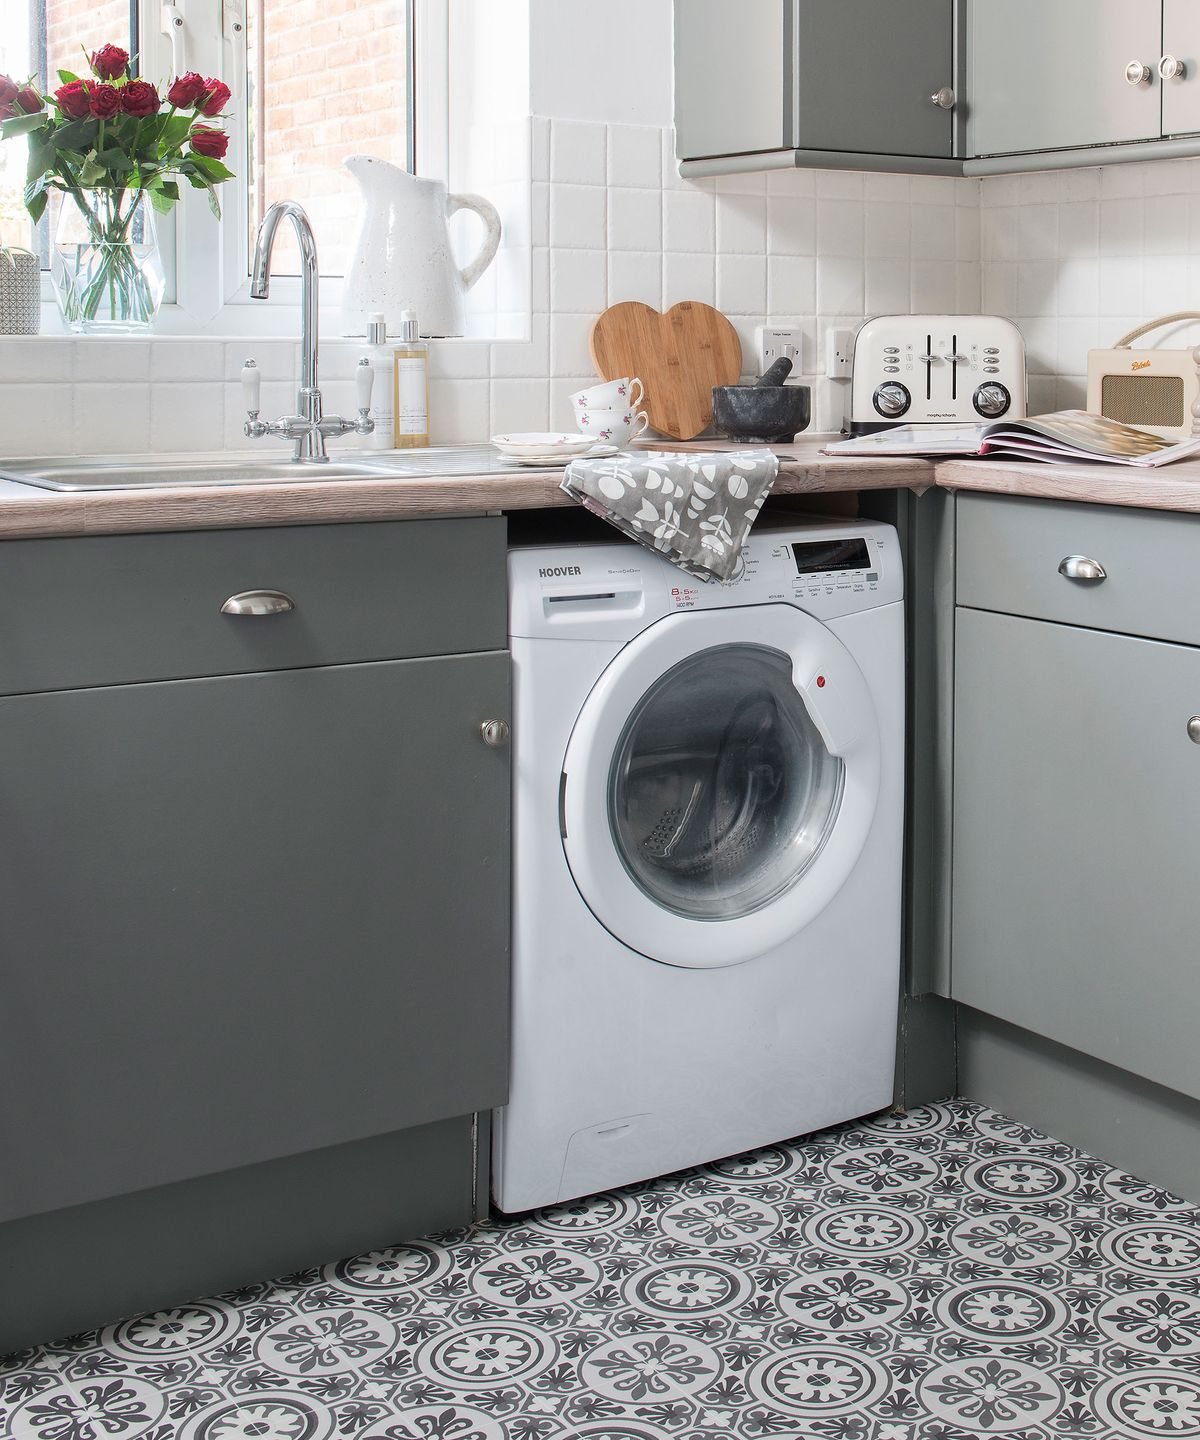 How to Clean a Washing Machine: A 6-Step Guide